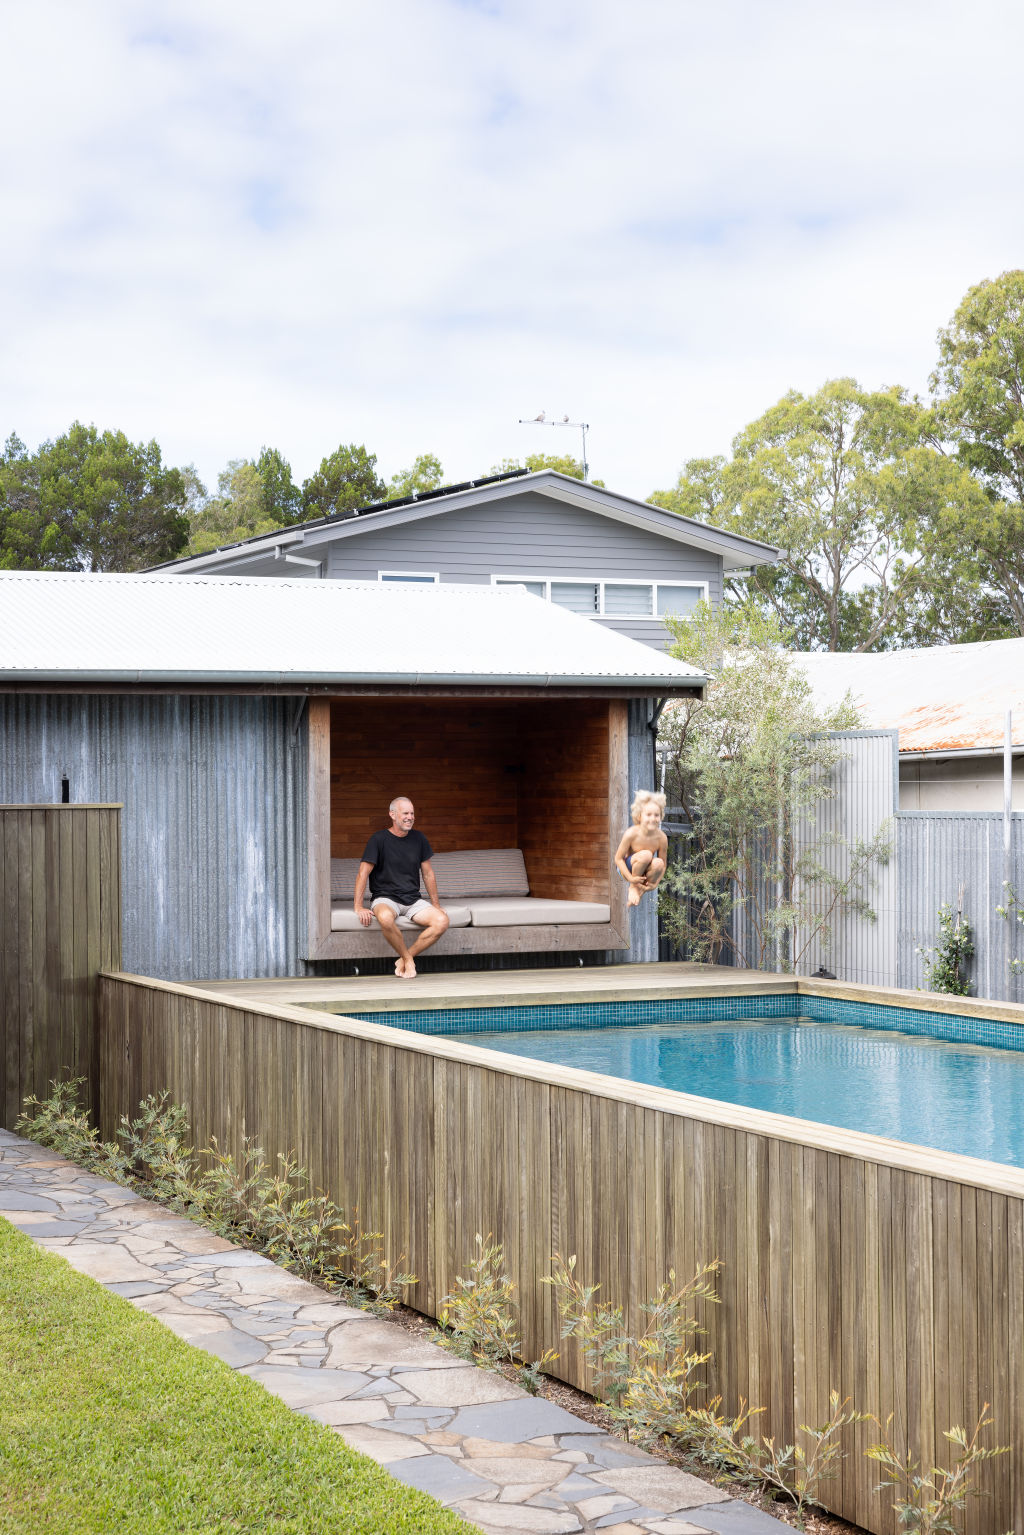 The deck leads out to a solar-heated pool bookended by a double garage. Photo: Louise Roche - The Design Villa